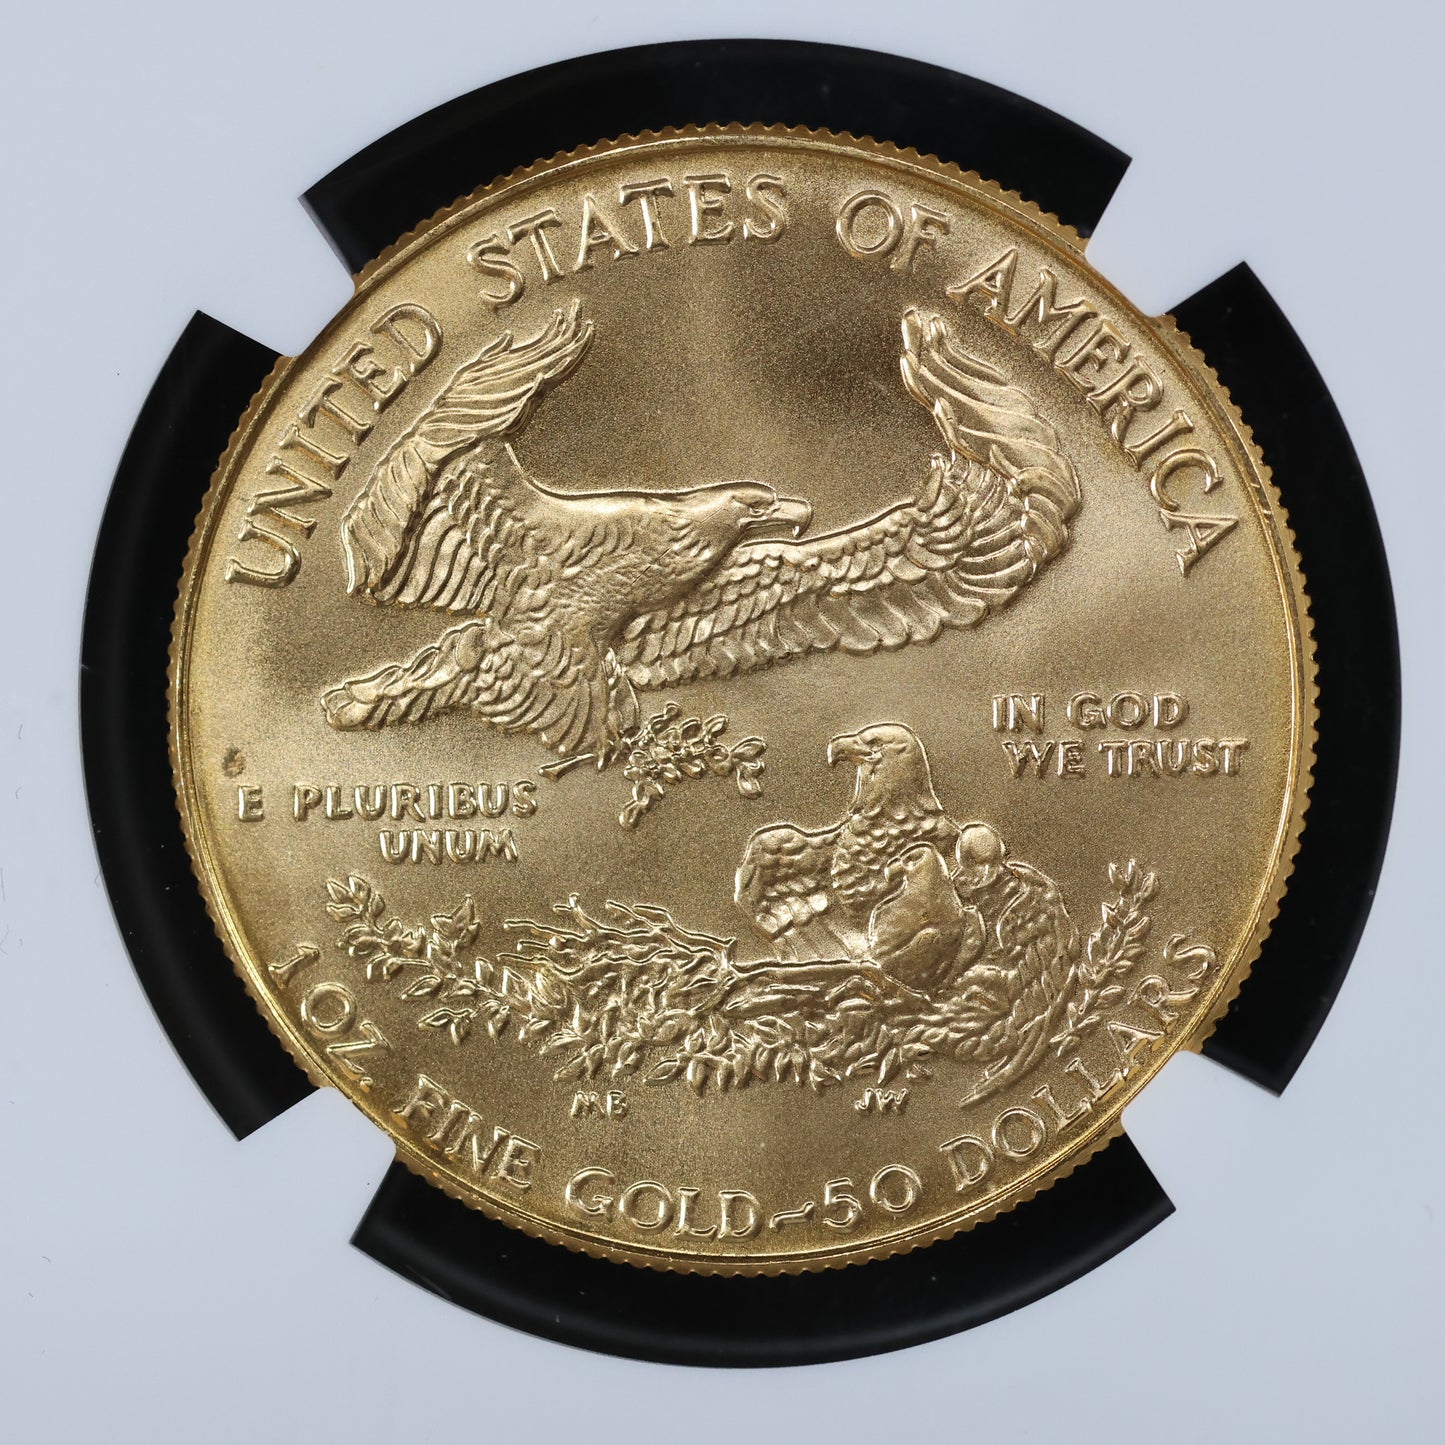 1992 1 oz Gold American Eagle 50$ Bullion Gold Coin - NGC MS 69